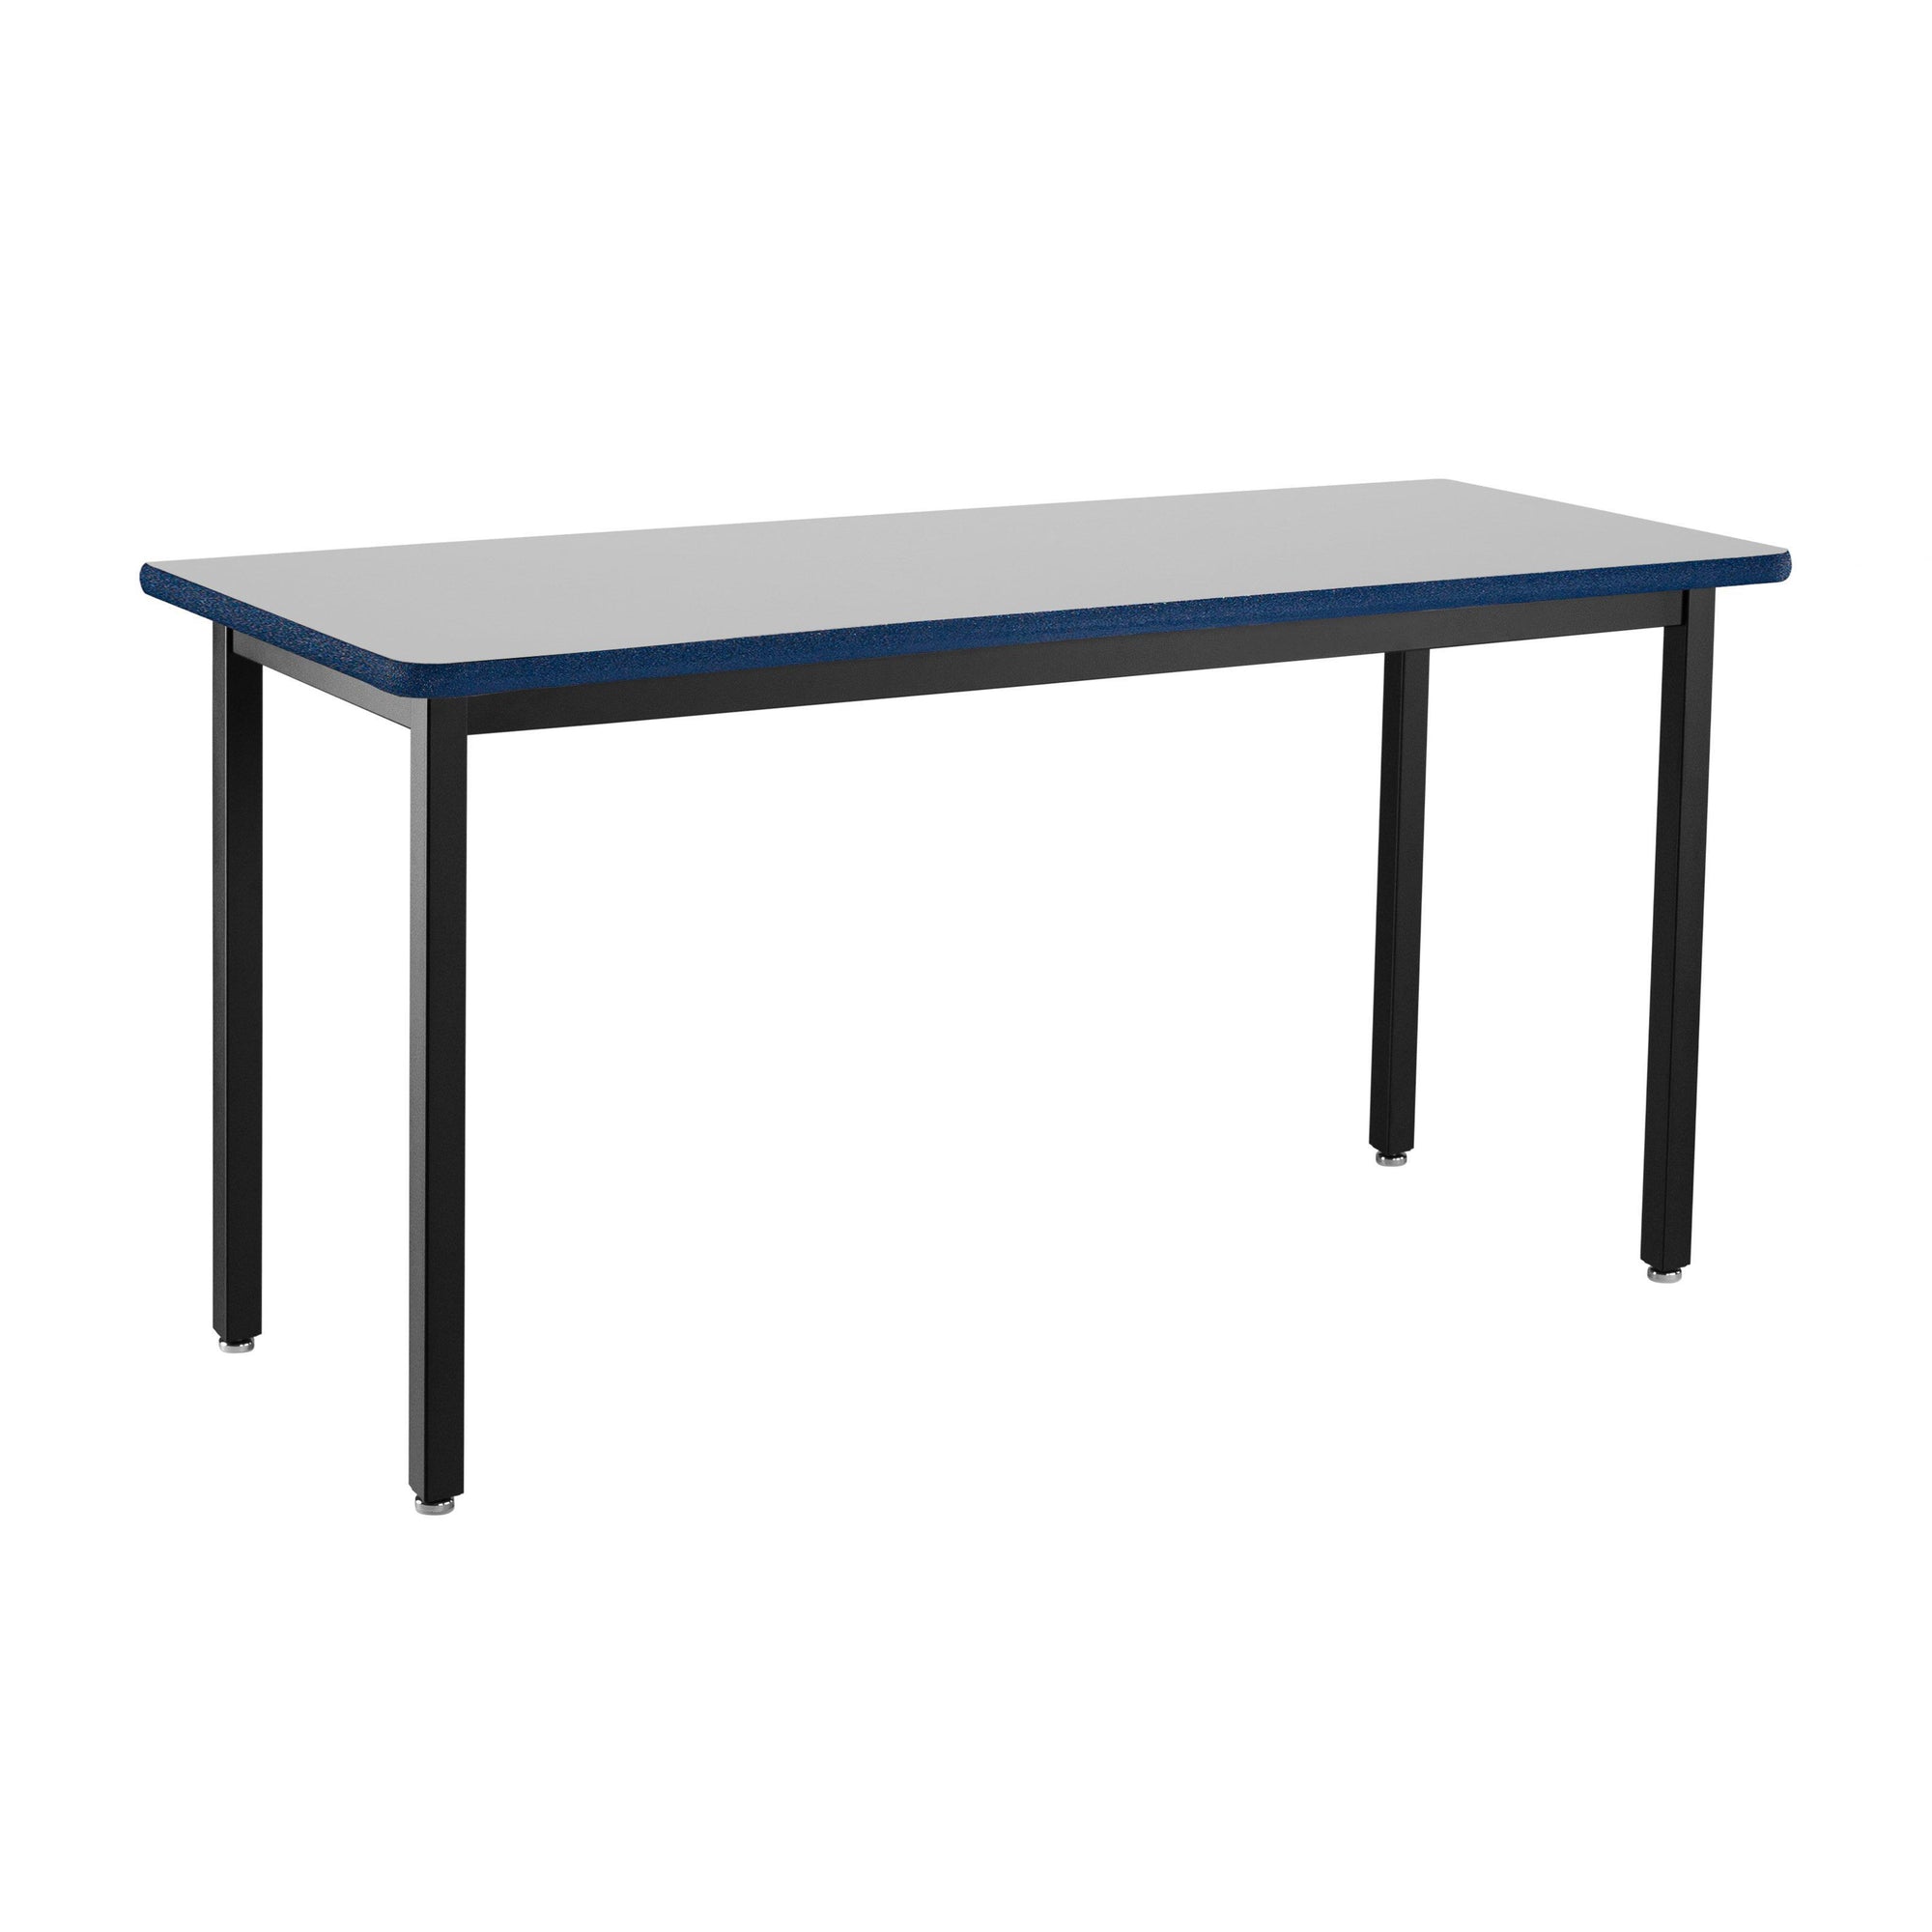 Heavy-Duty Fixed Height Utility Table, Black Frame, 24" x 54", Supreme High-Pressure Laminate Top with Black ProtectEdge